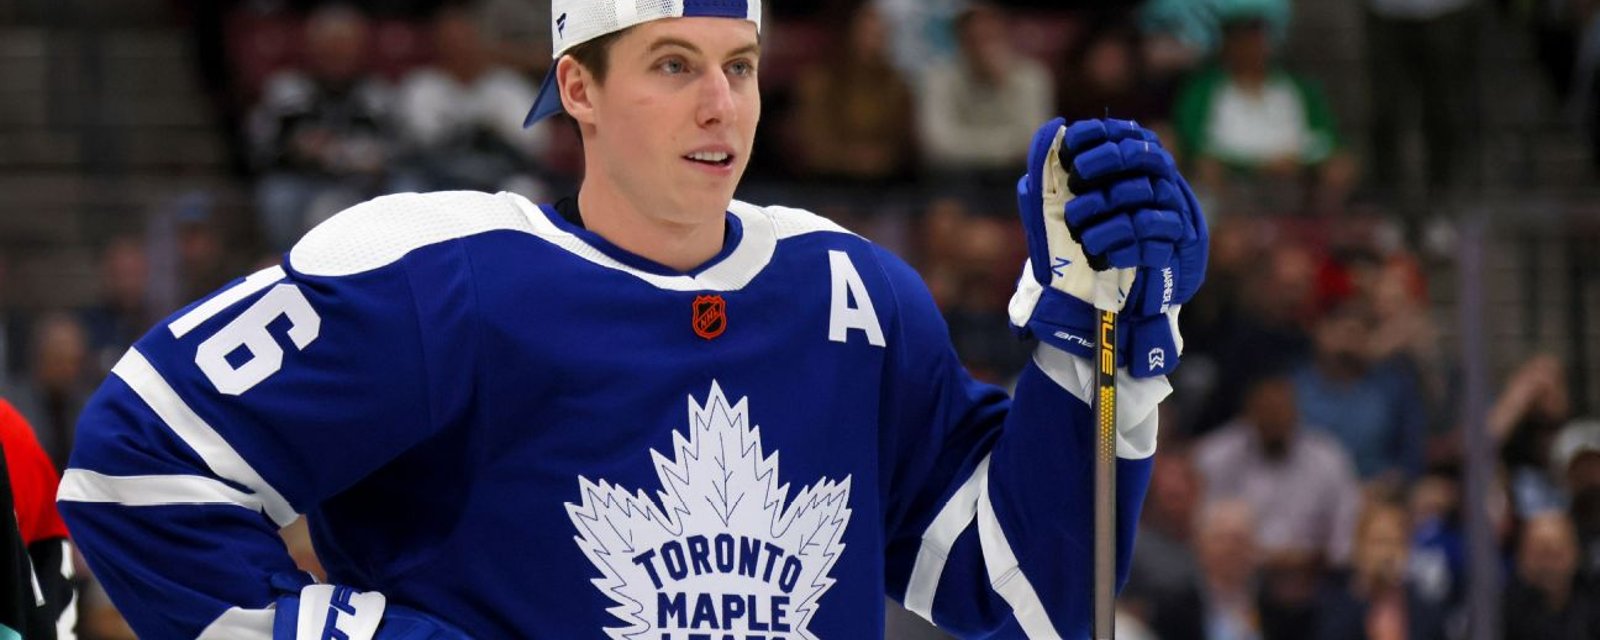 Toronto's Mitch Marner has a message for the “haters” 